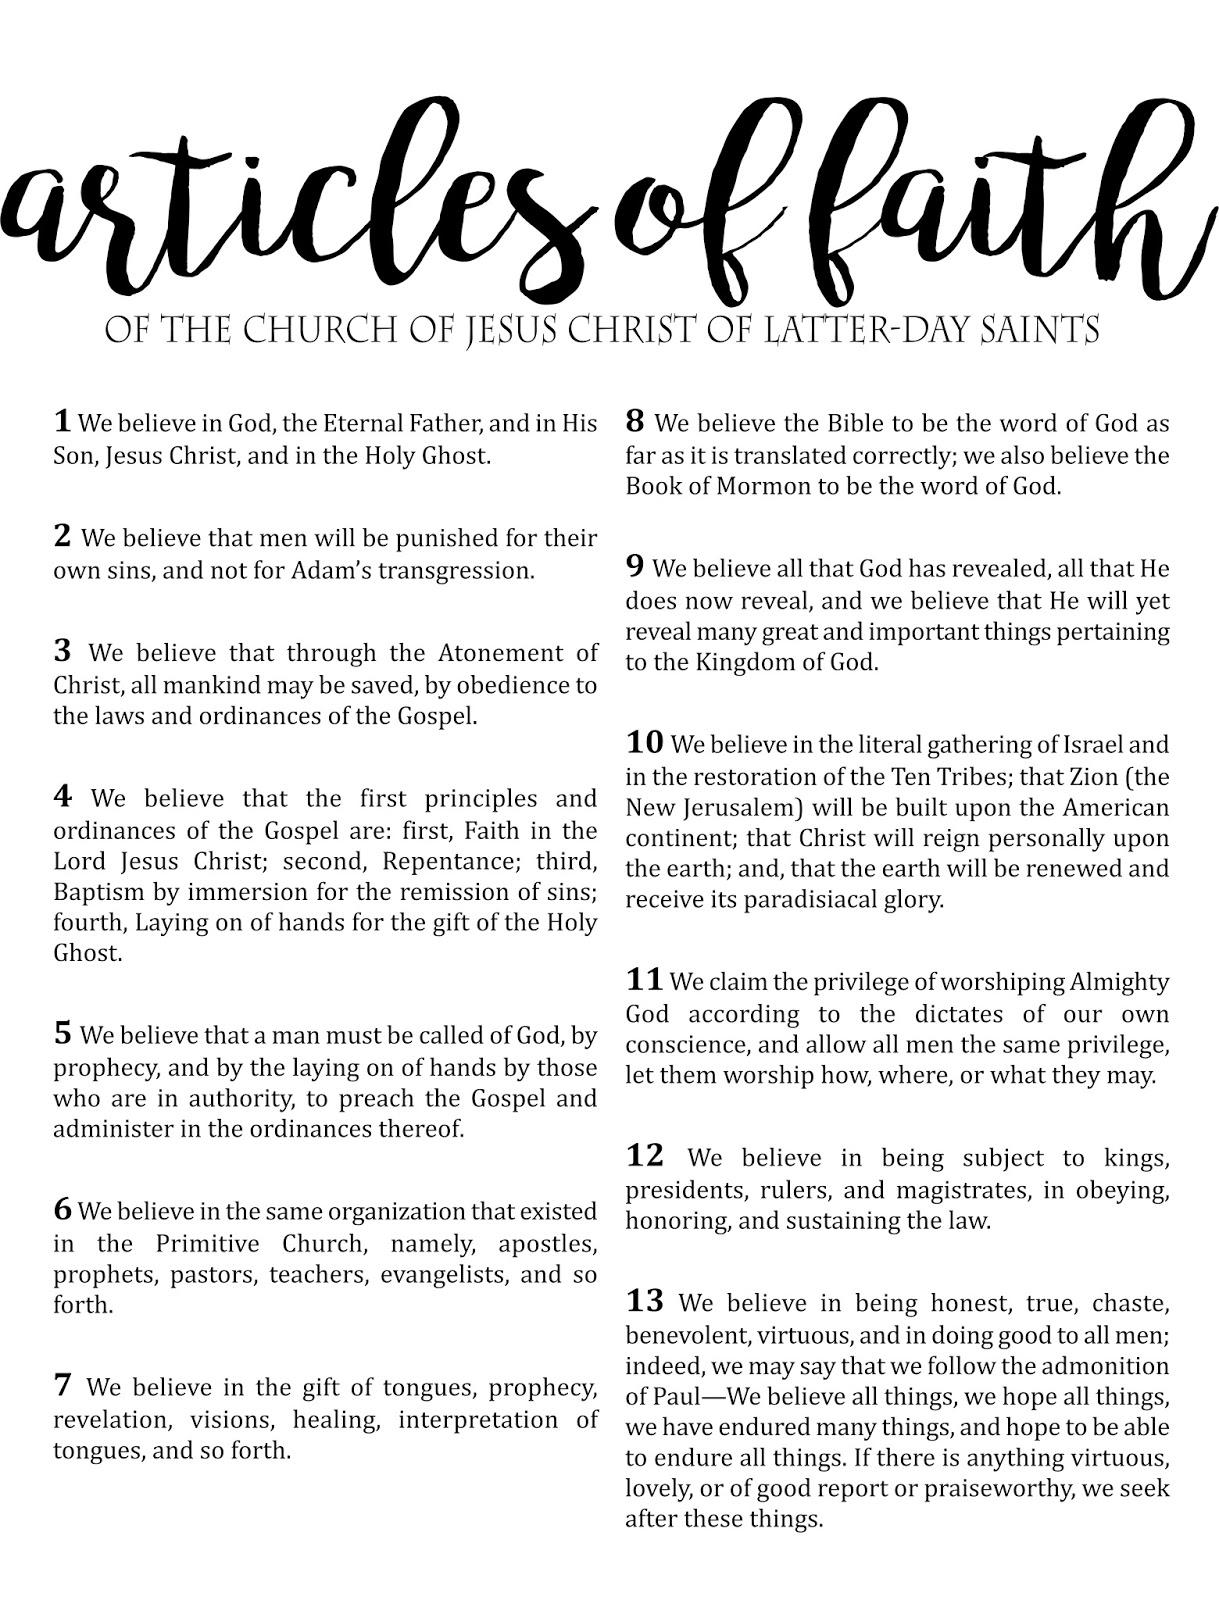 lds-articles-of-faith-printable